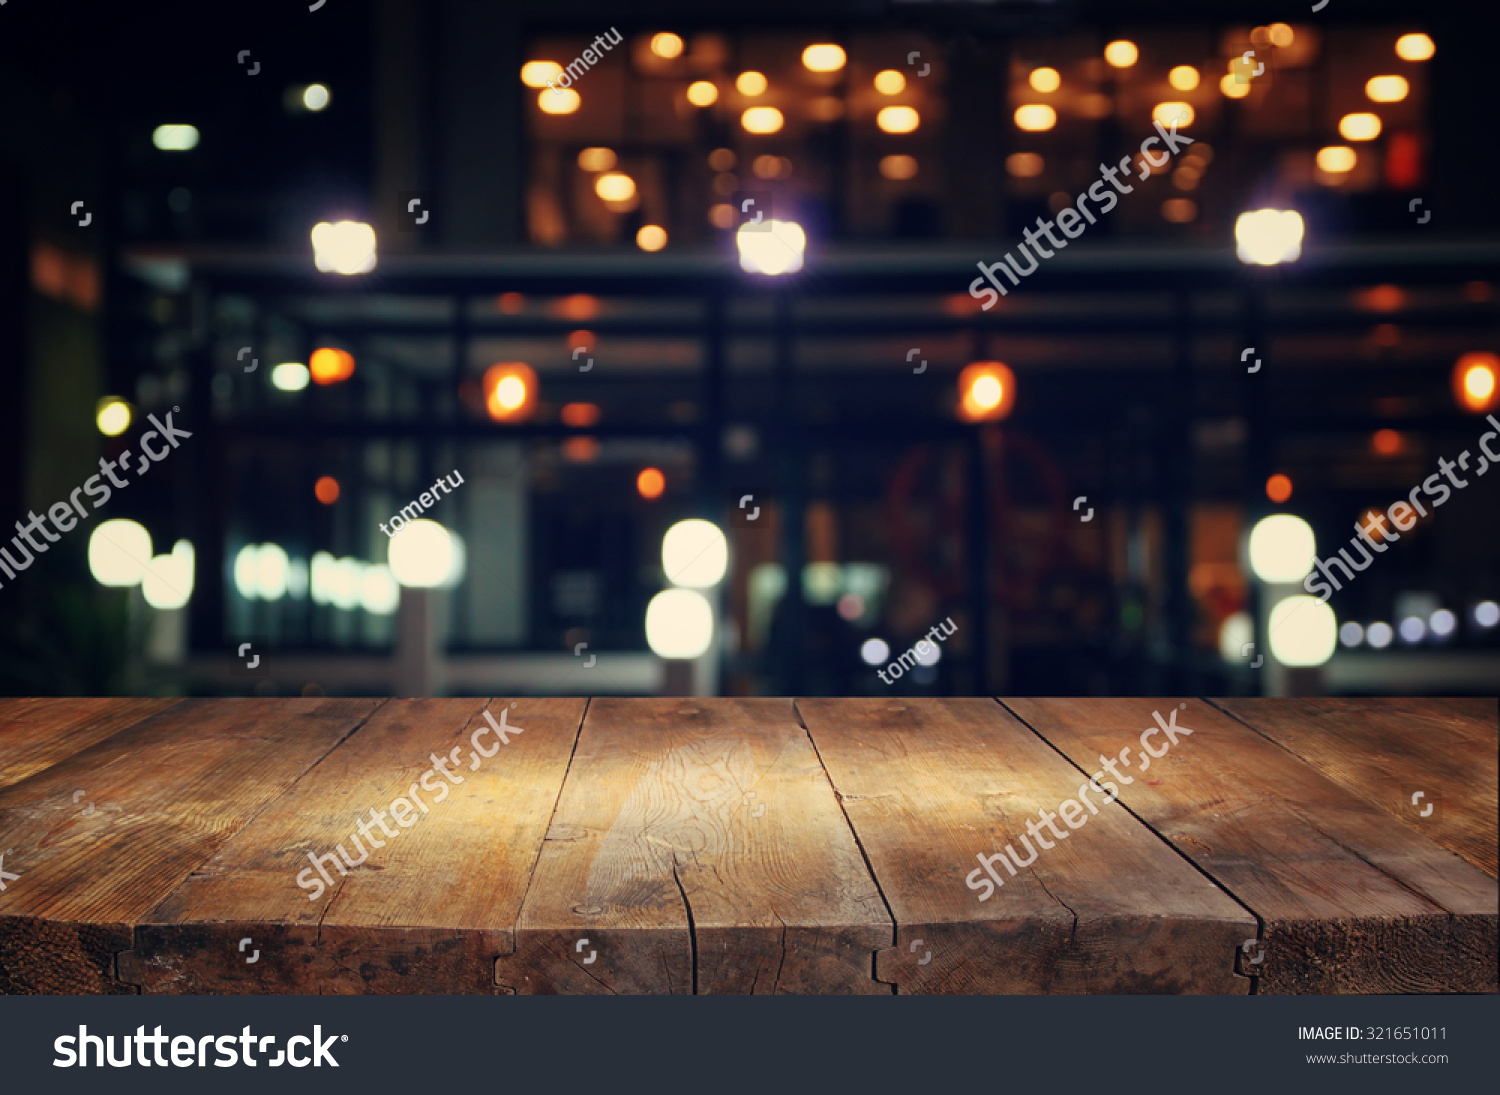 image of wooden table in front of abstract blurred background of resturant lights
 #321651011